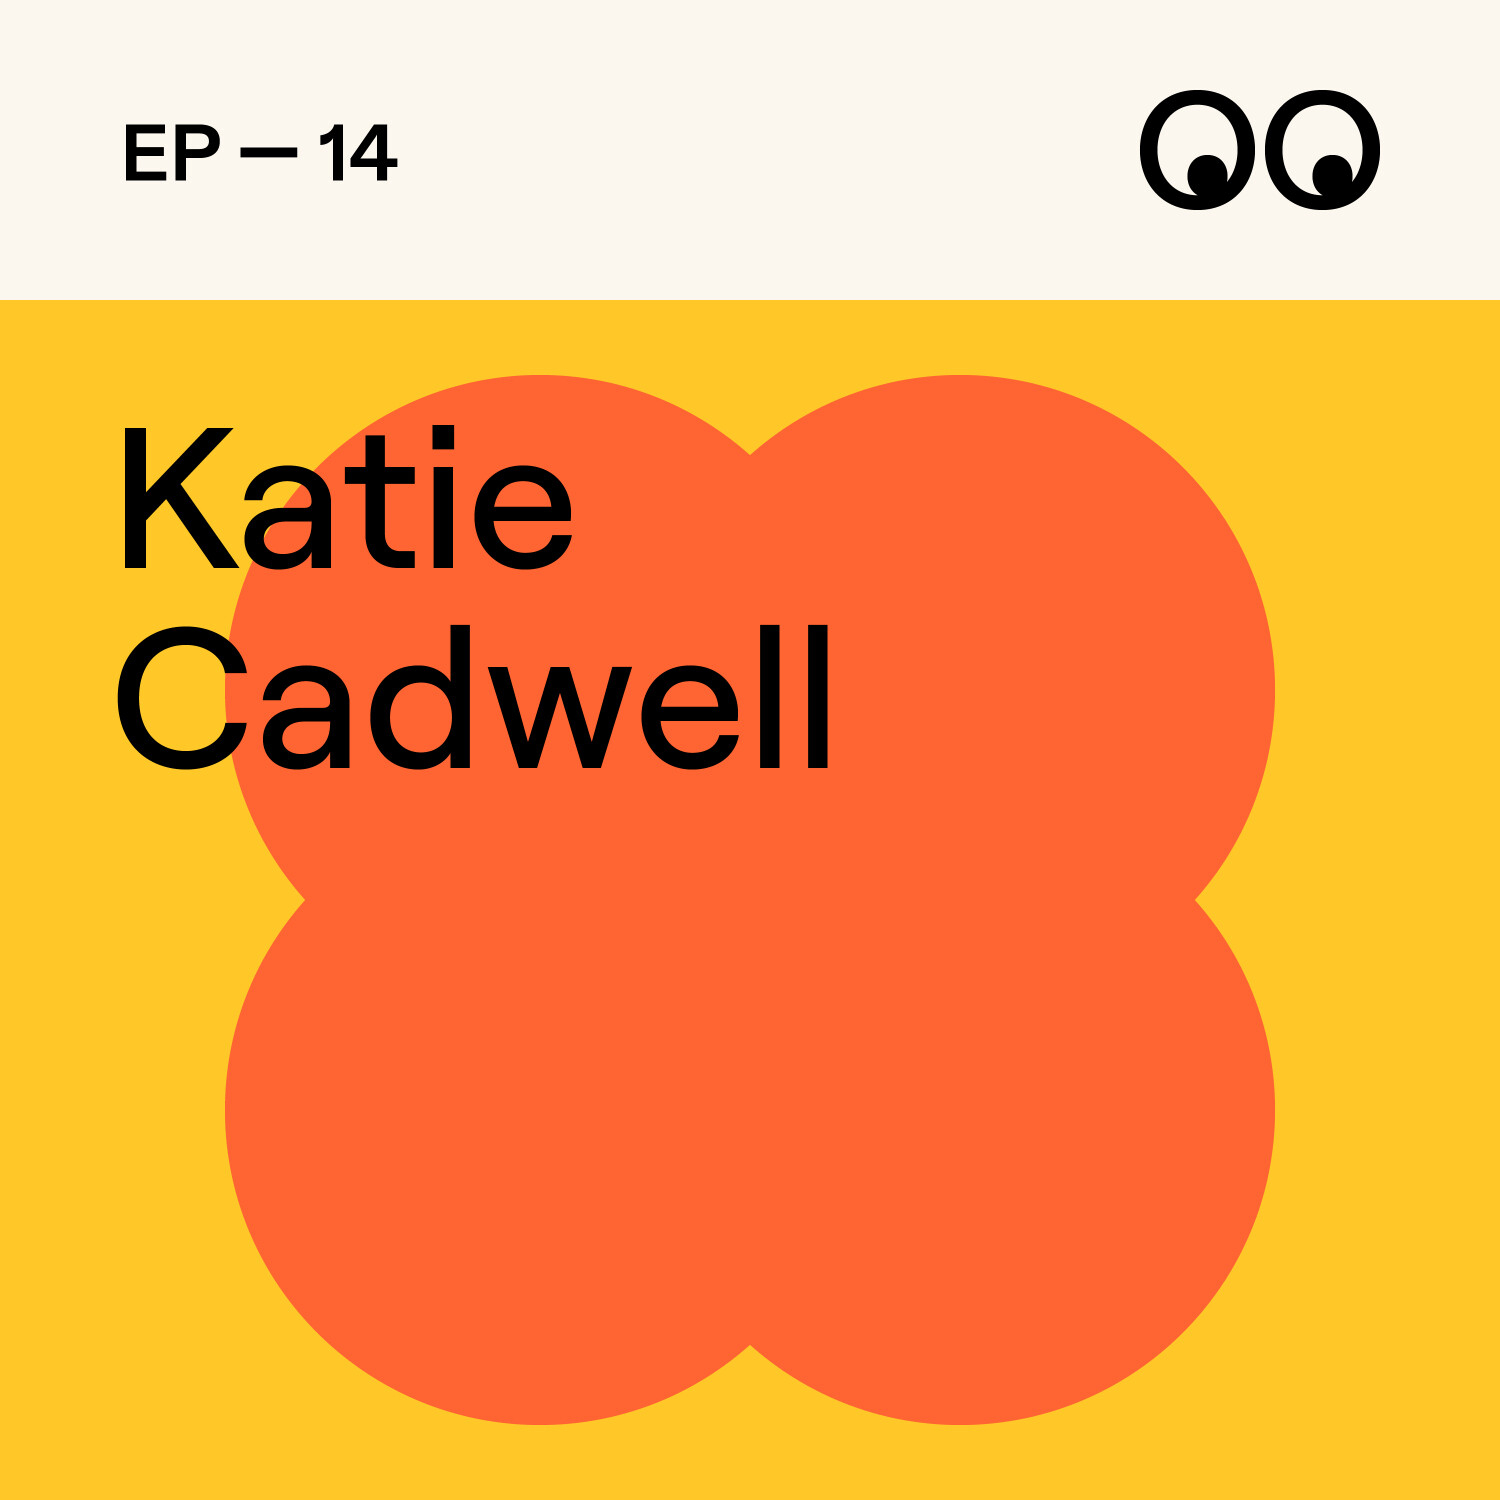 Moving to Australia for a new role at Design Studio, with Katie Cadwell